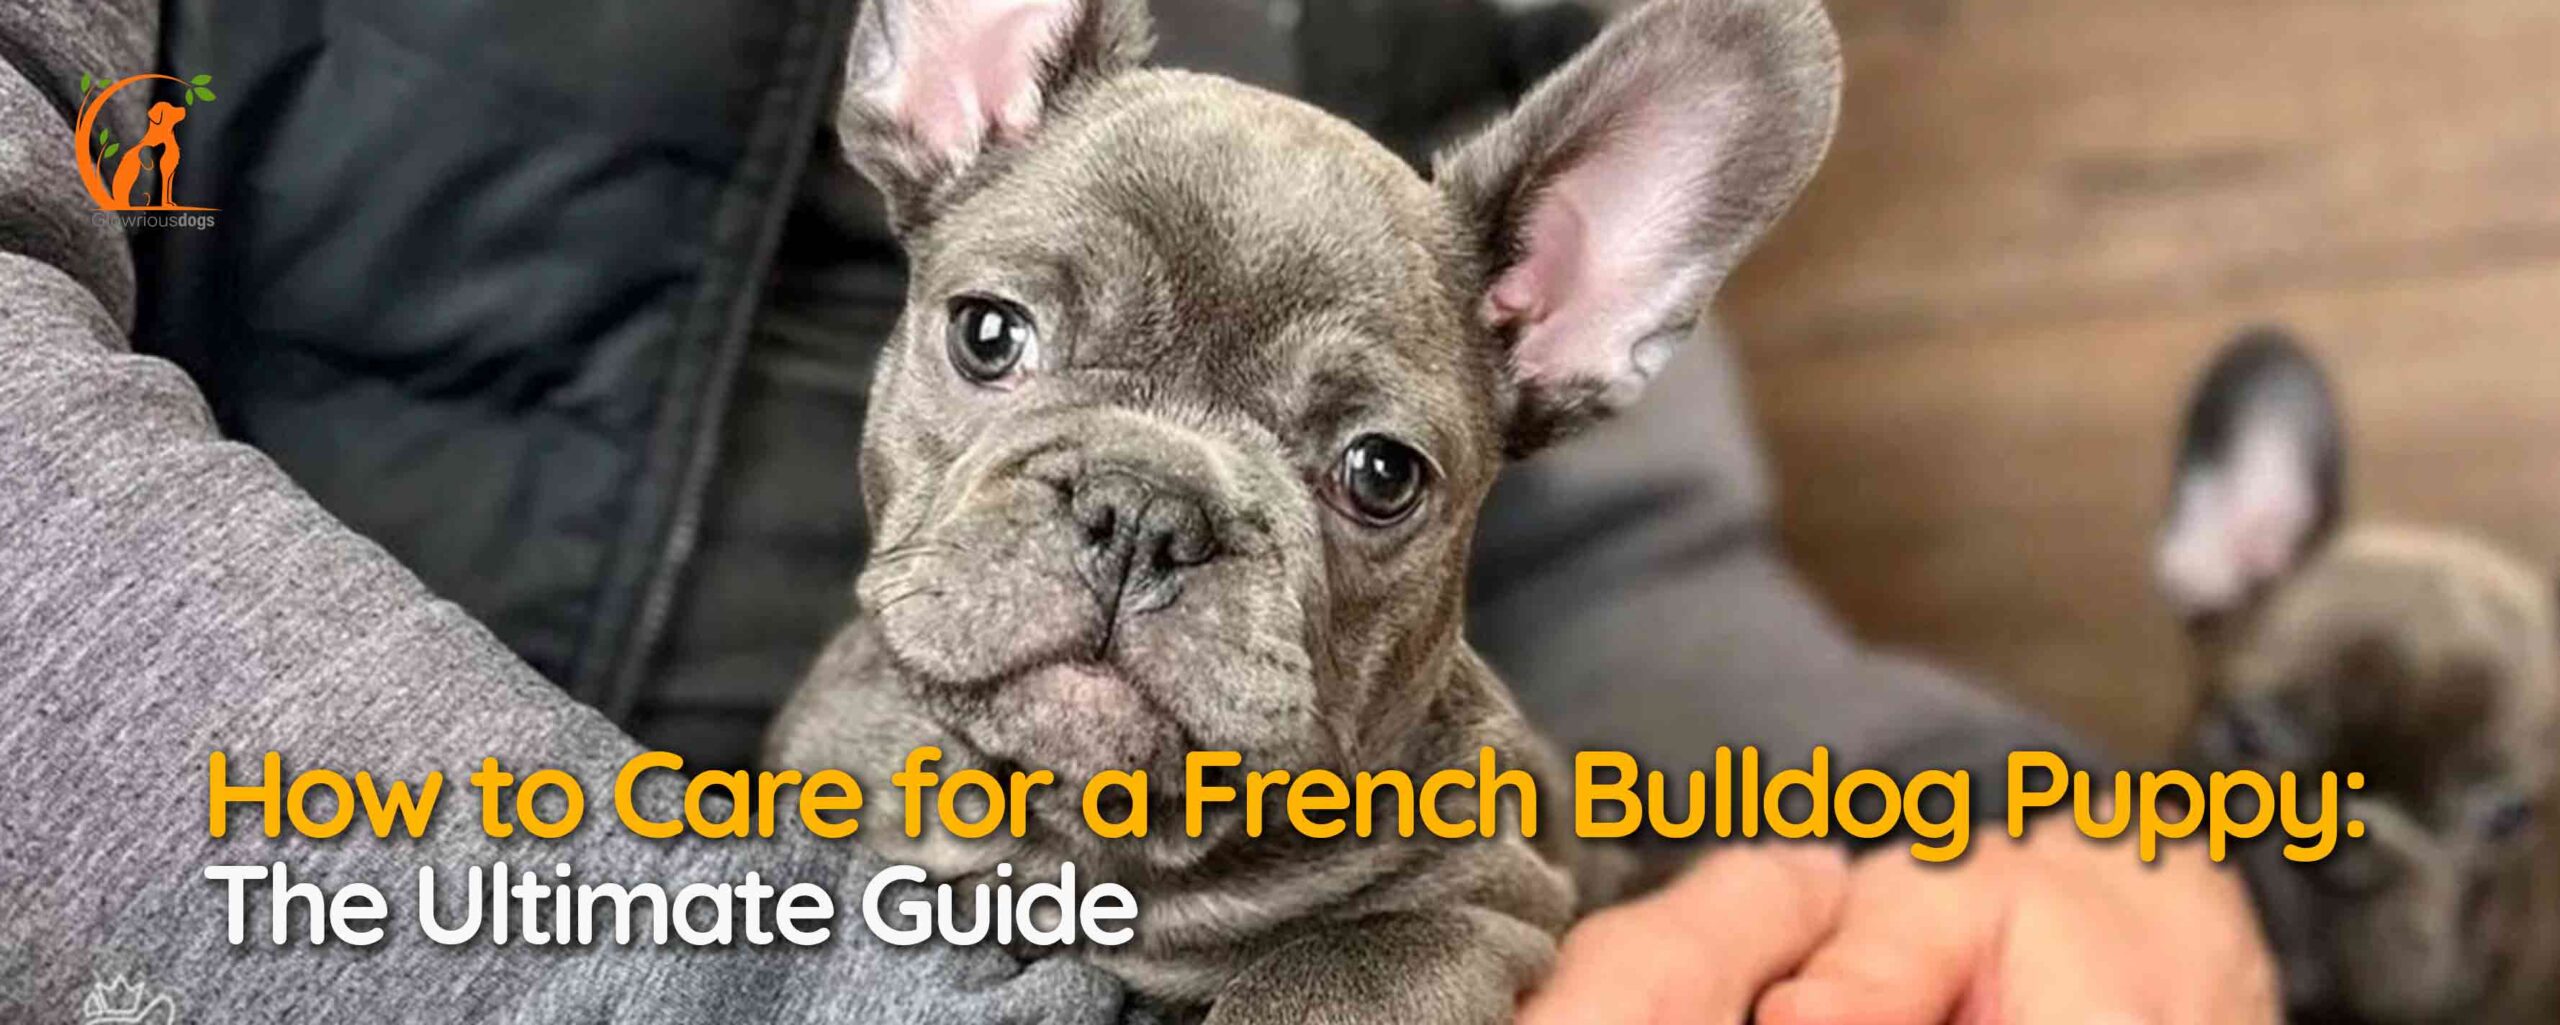 How to Care for a French Bulldog Puppy: The Ultimate Guide